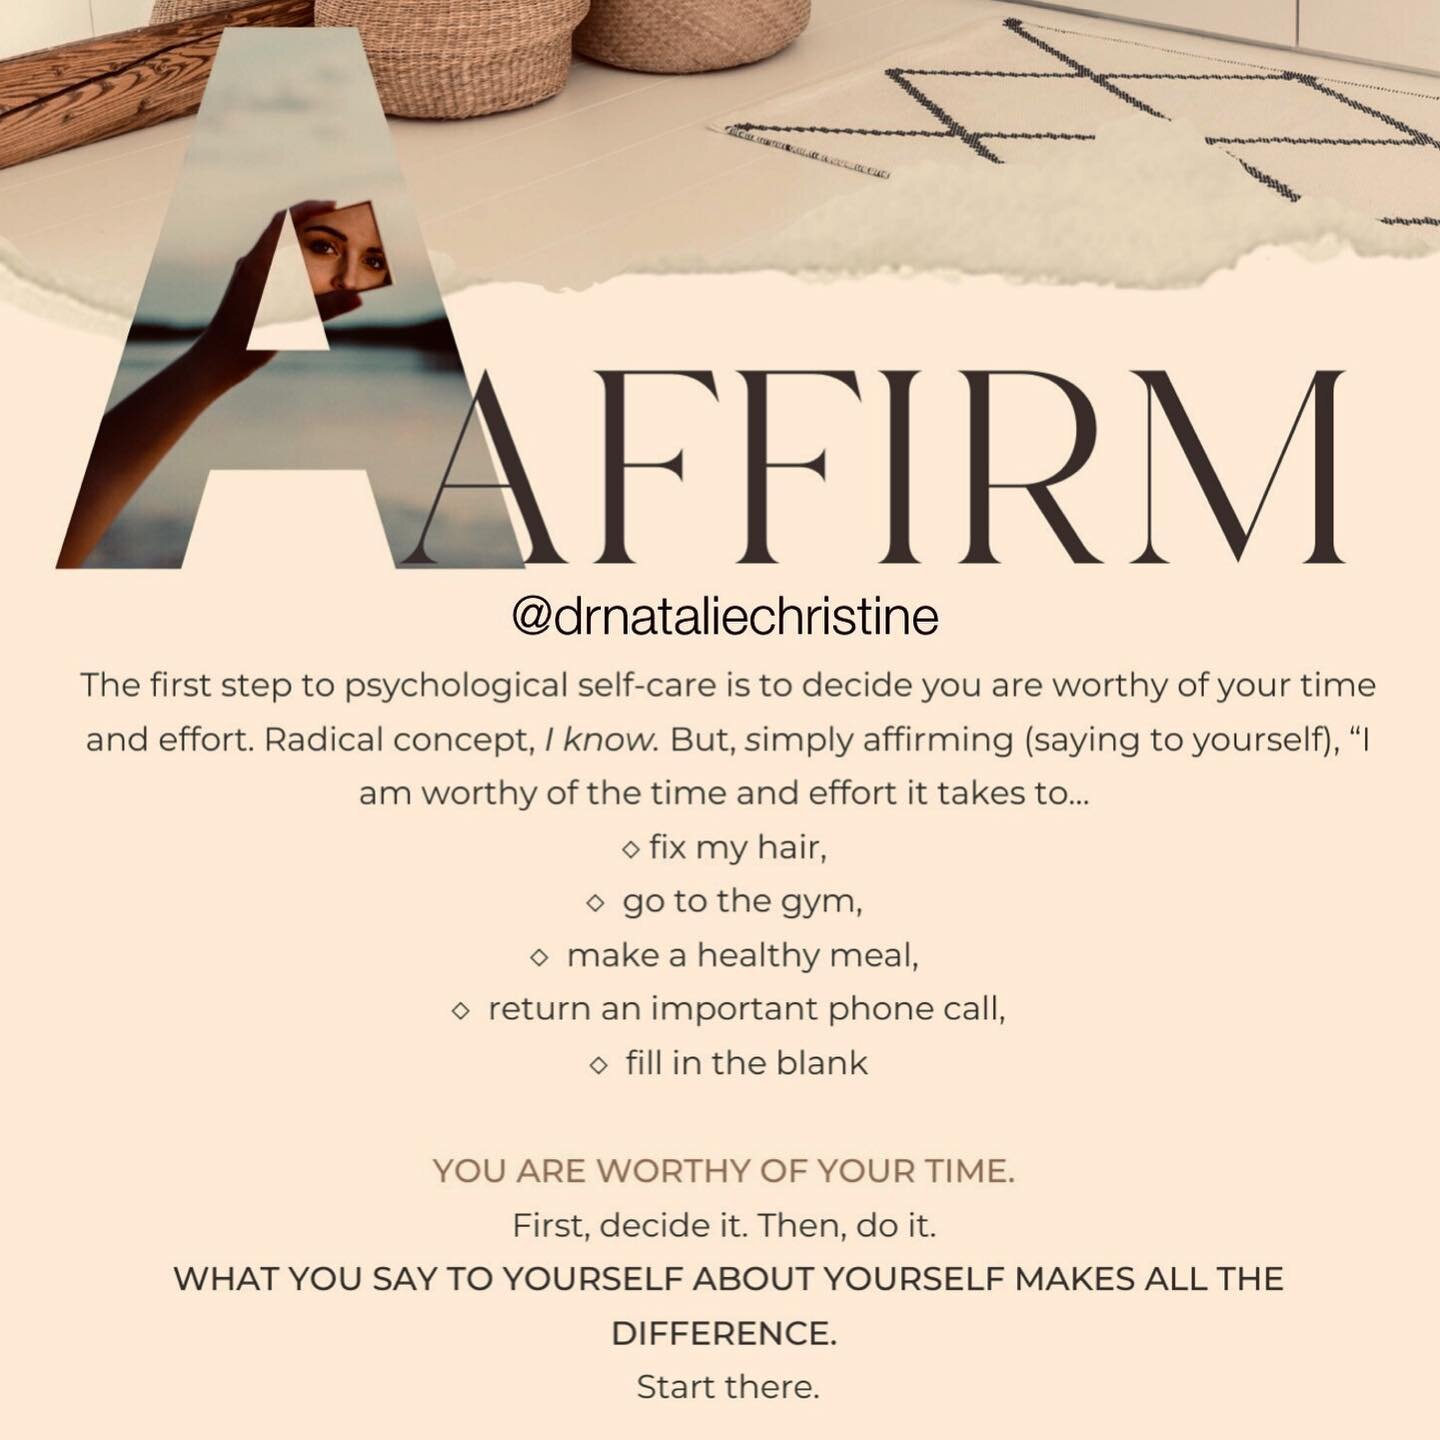 Affirm. 

The first step to psychological self-care is to decide you are worthy of your time and effort. Radical concept, I know. But, simply affirming (saying to yourself): I am worthy of the time and effort it takes to:

&bull; fix my hair
&bull; g